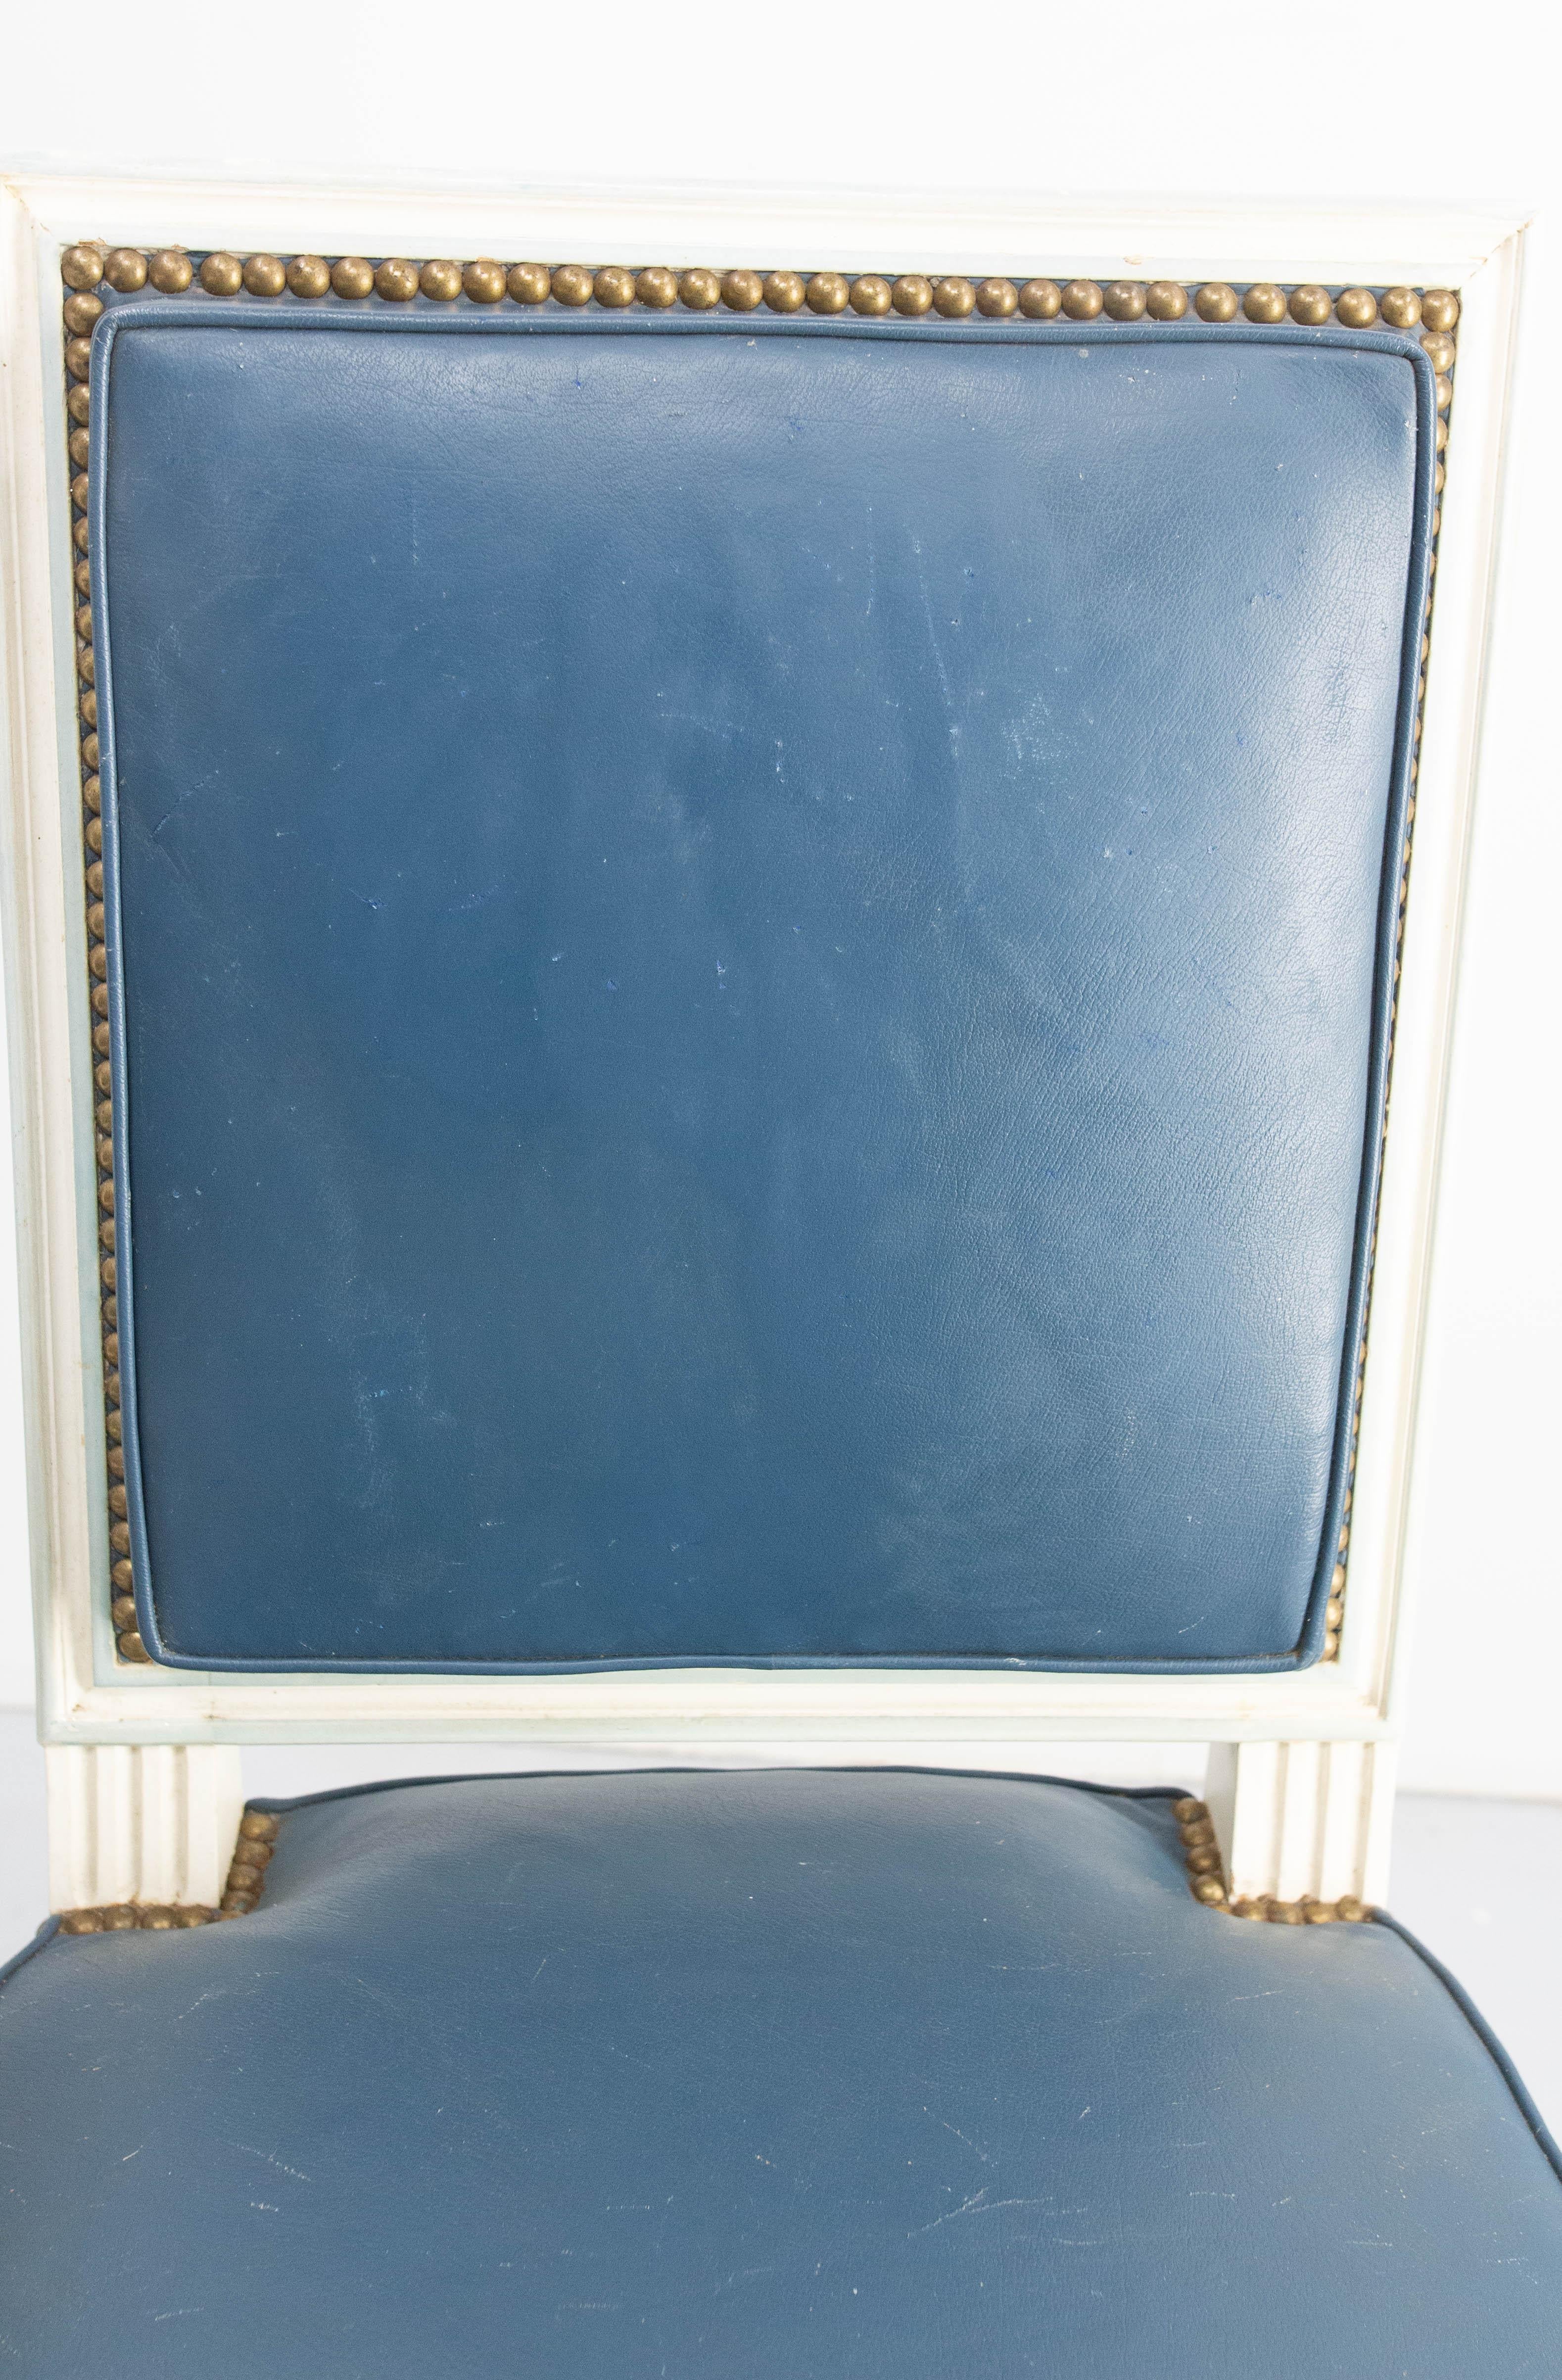 Six Dining Chairs Painted Wood & Blue Skai Louis 16 Style, Midcentury French For Sale 8